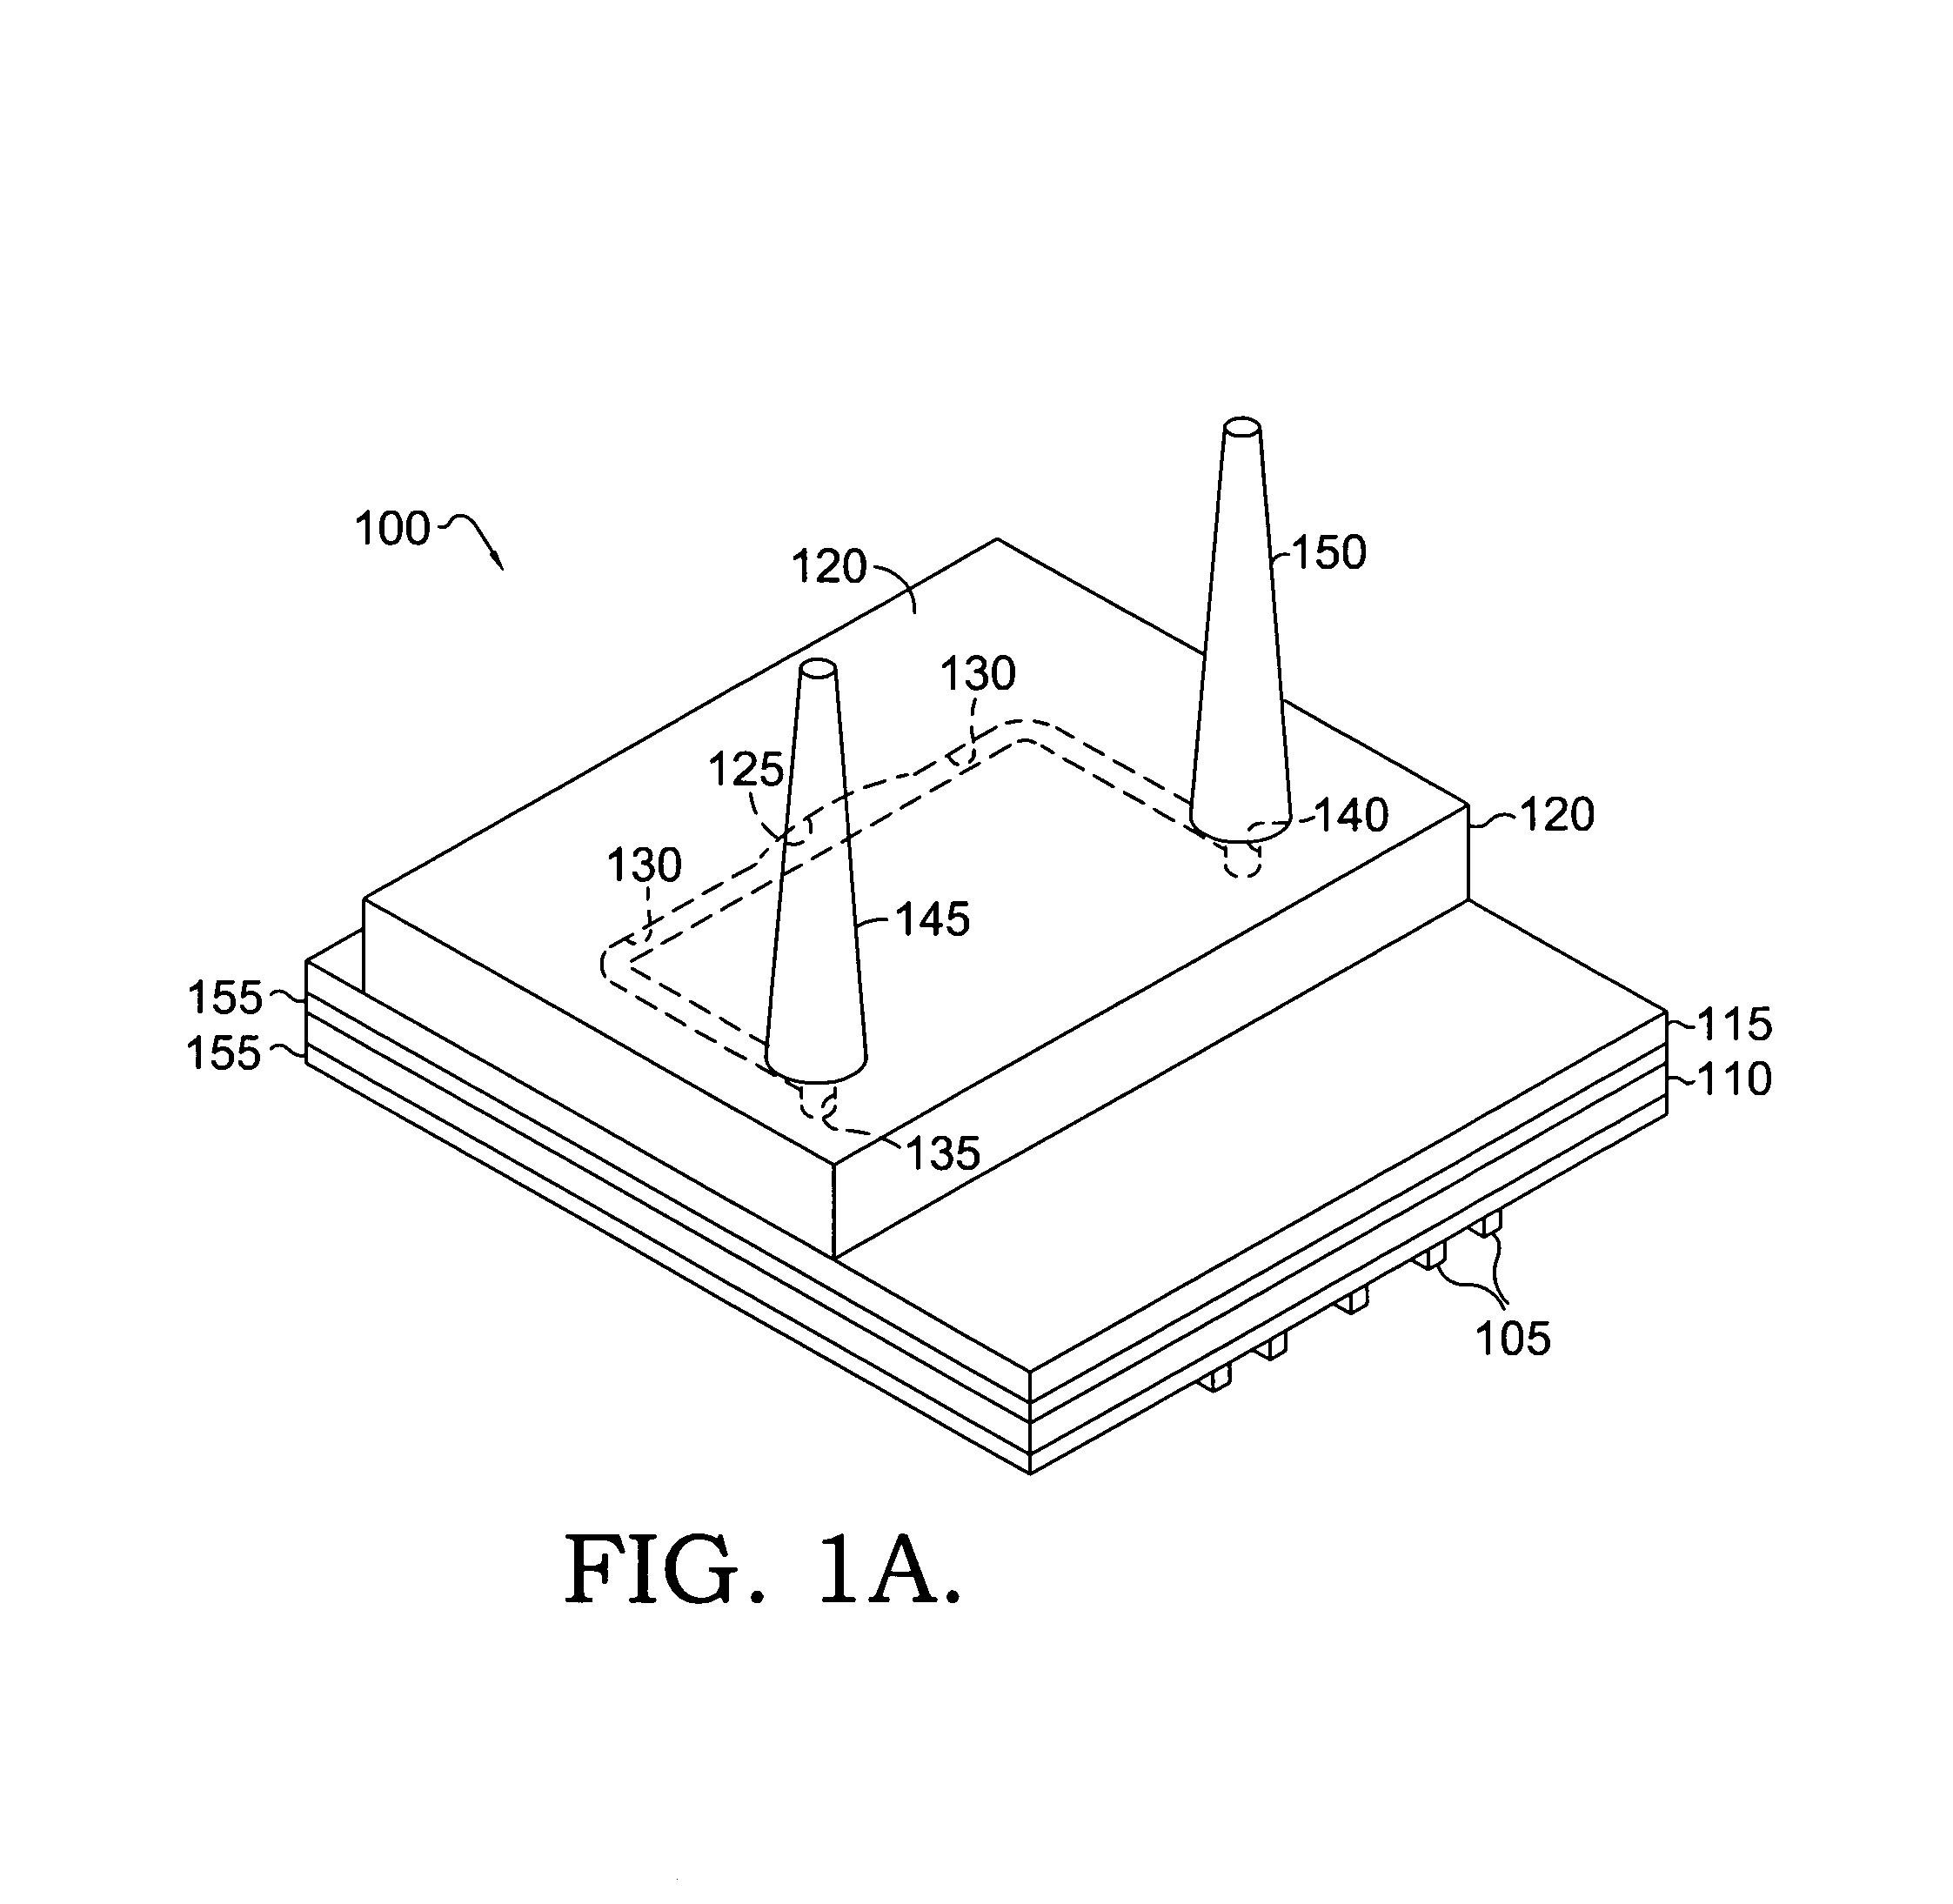 Reusable PCR amplification system and method